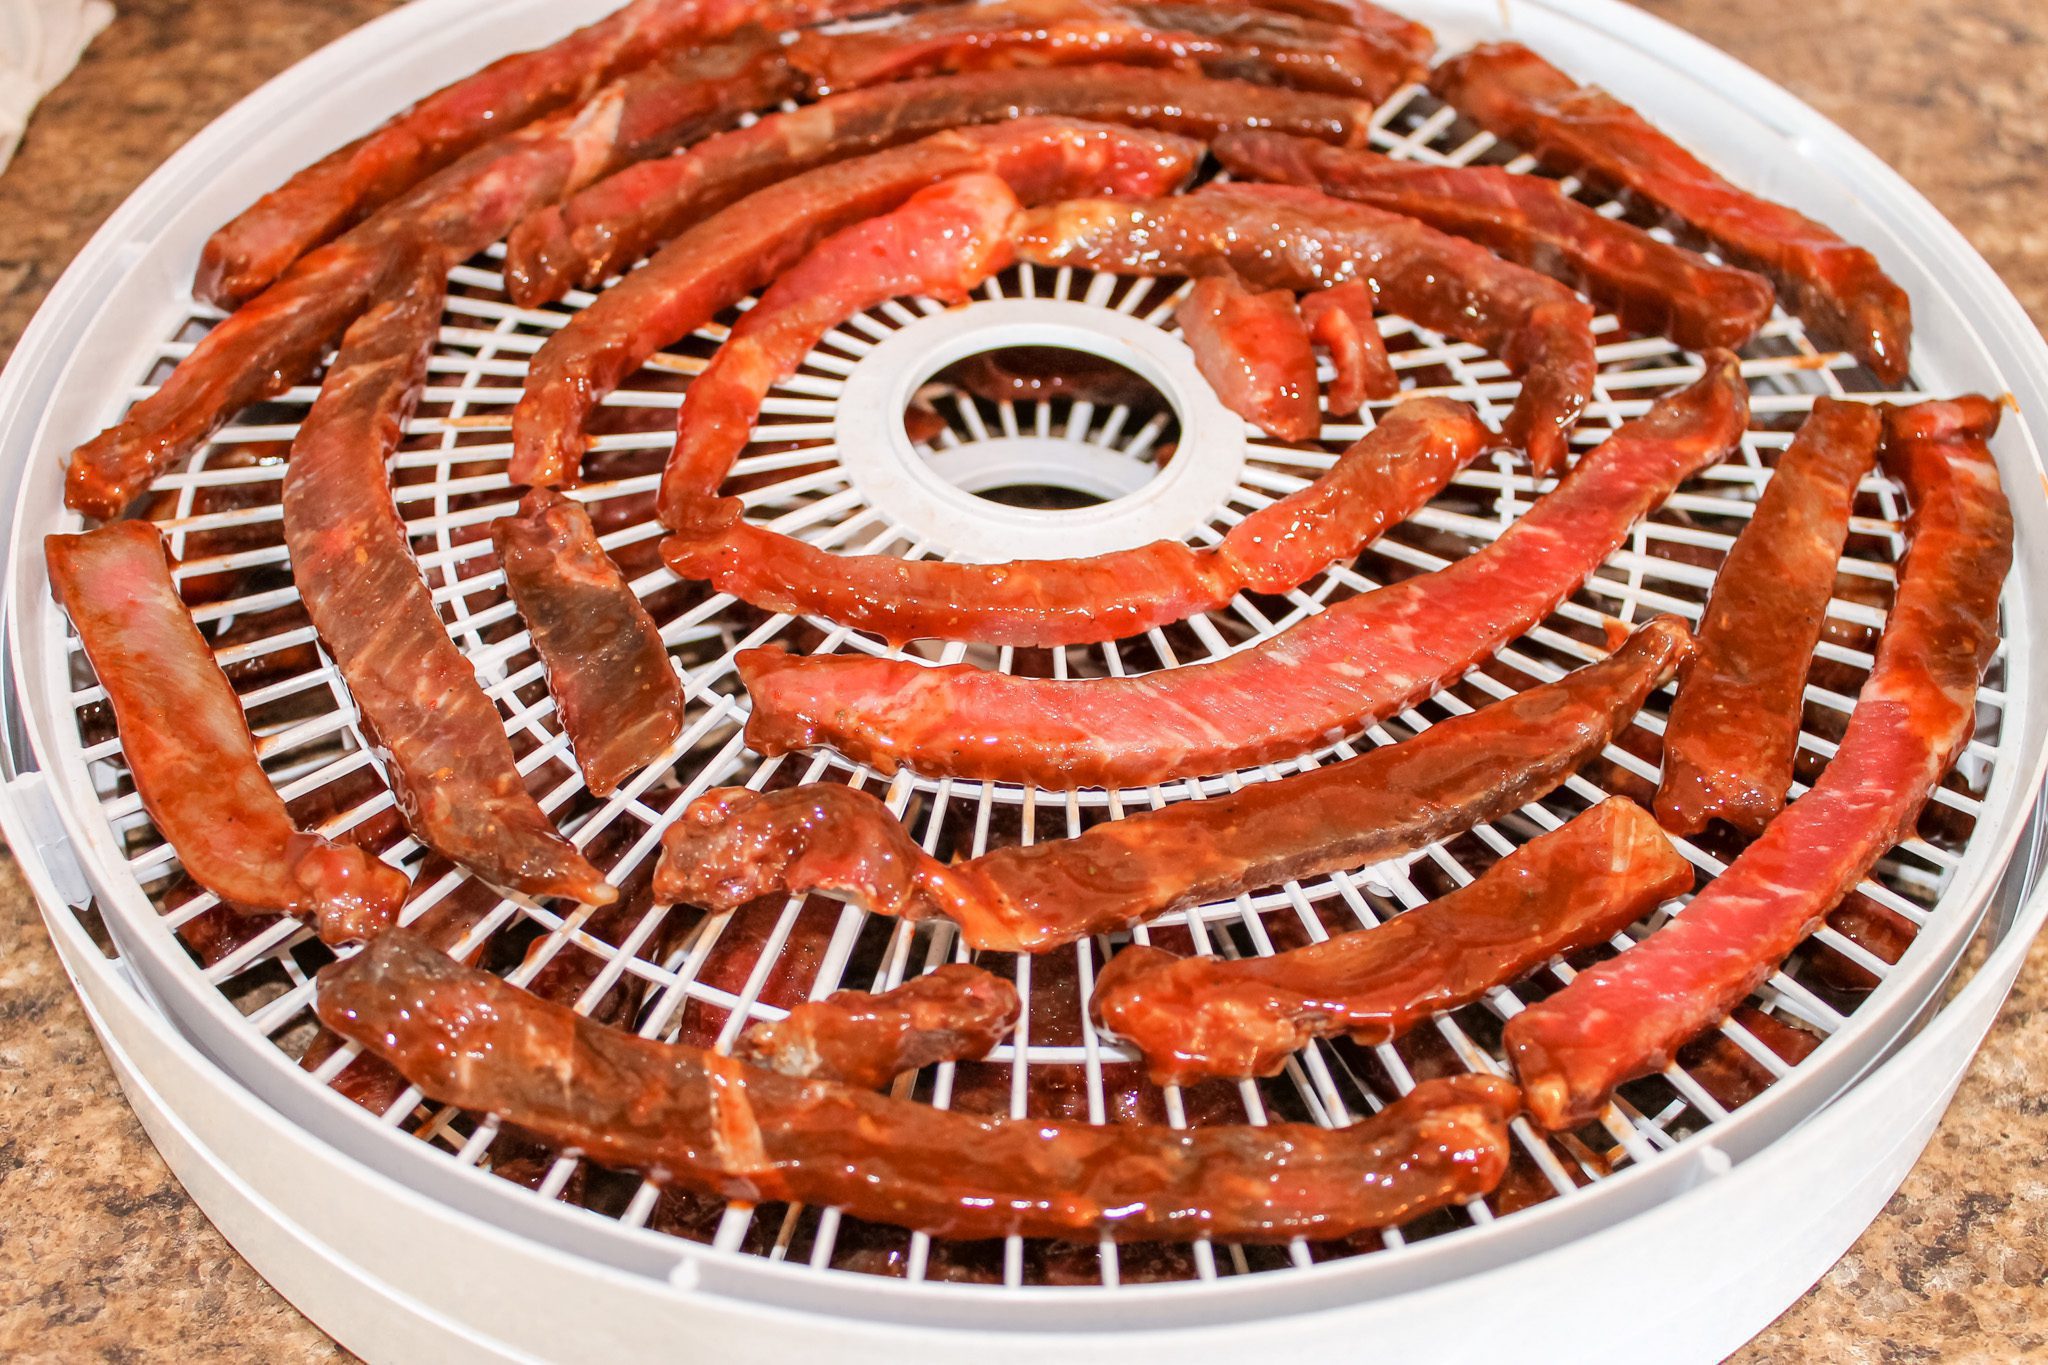 https://wholemadehomestead.com/wp-content/uploads/2022/02/dehydrating-beef-jerky.jpg